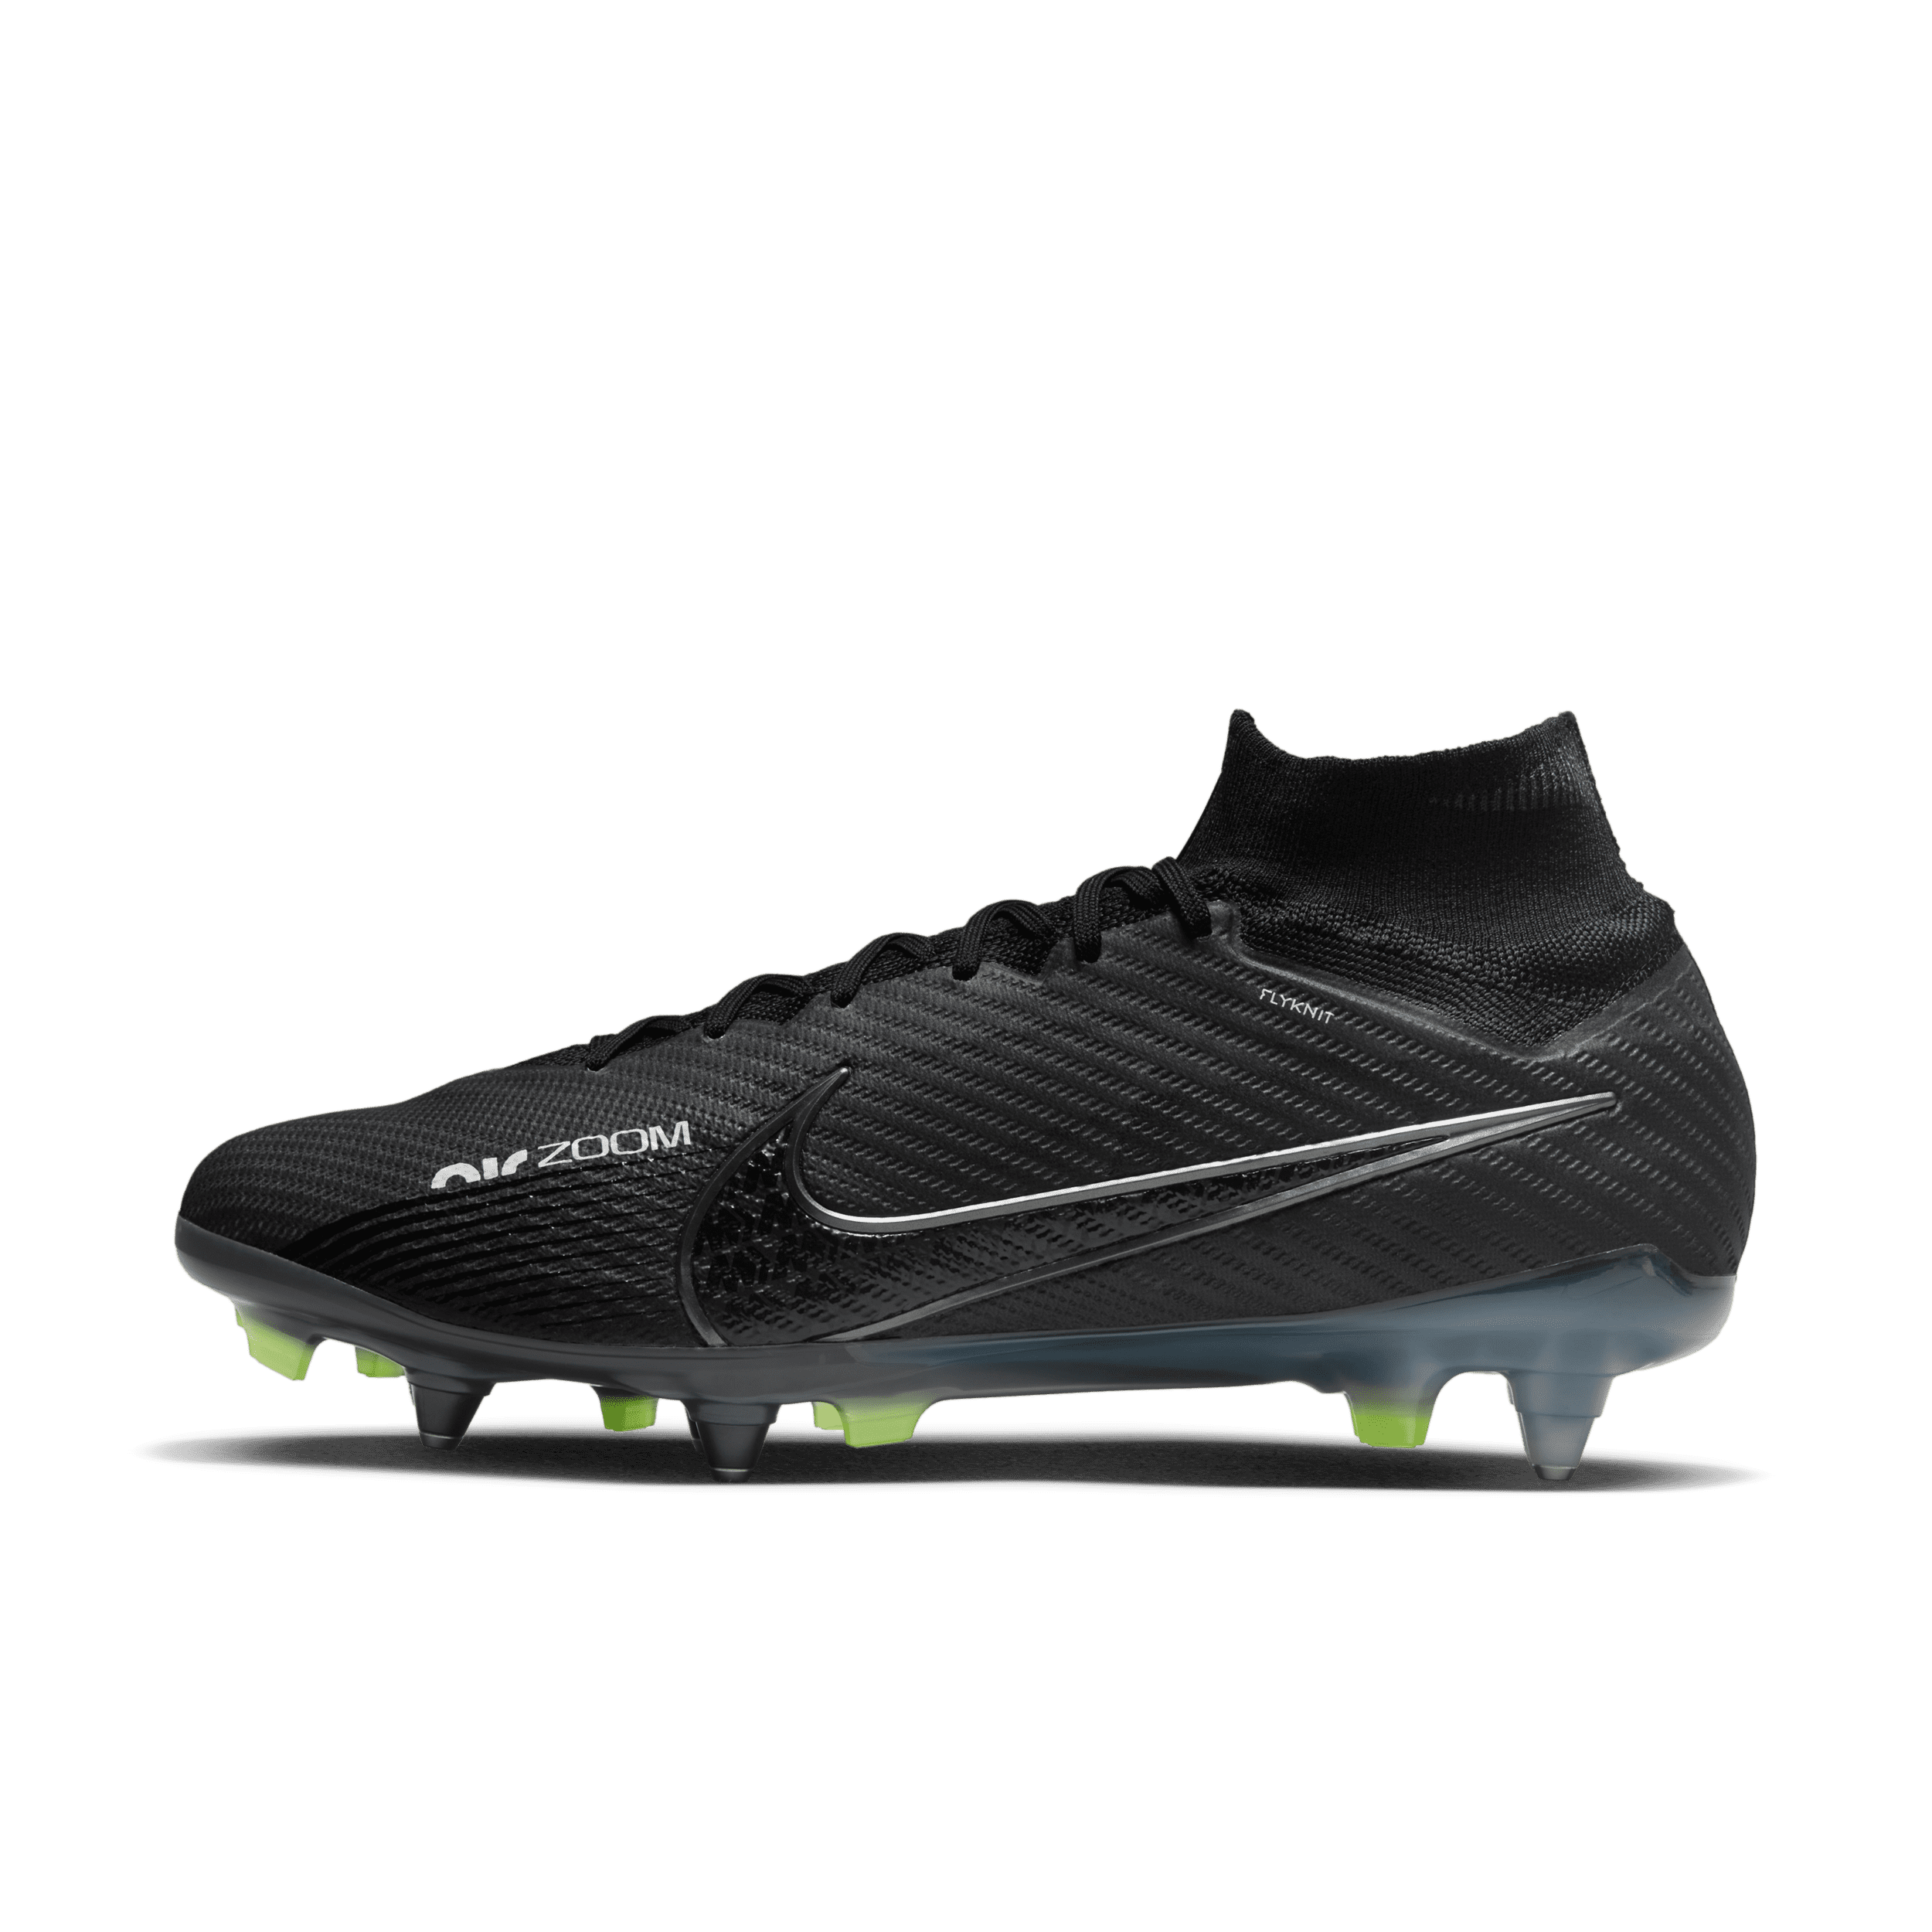 naked Dictate Coin laundry Nike Mercurial Superfly Elite DF SG Football Boots | FOOTY.COM